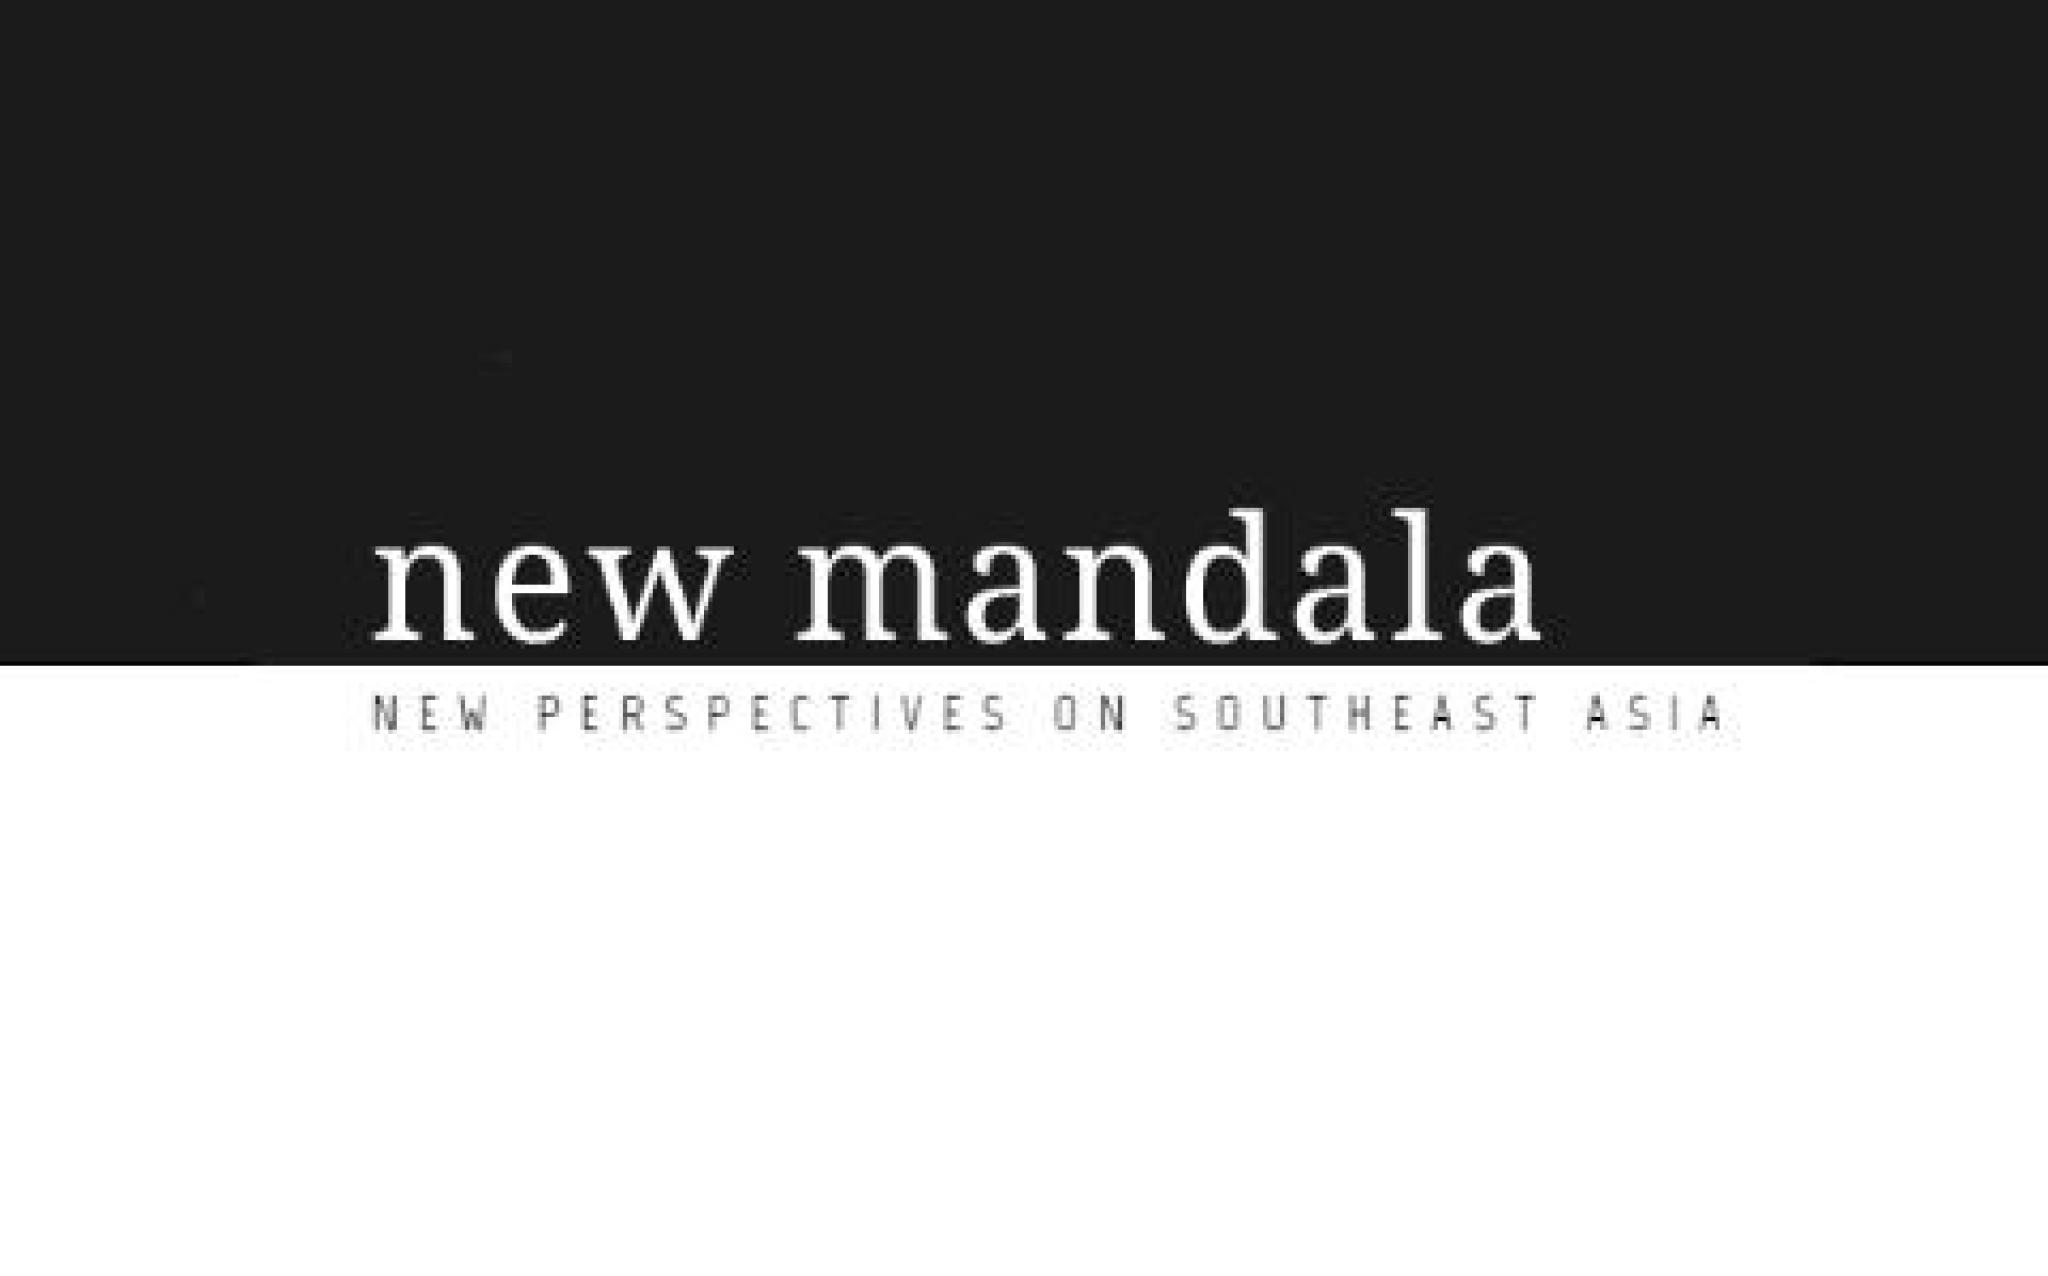 New Mandala Banner - New perspectives on Southeast Asia